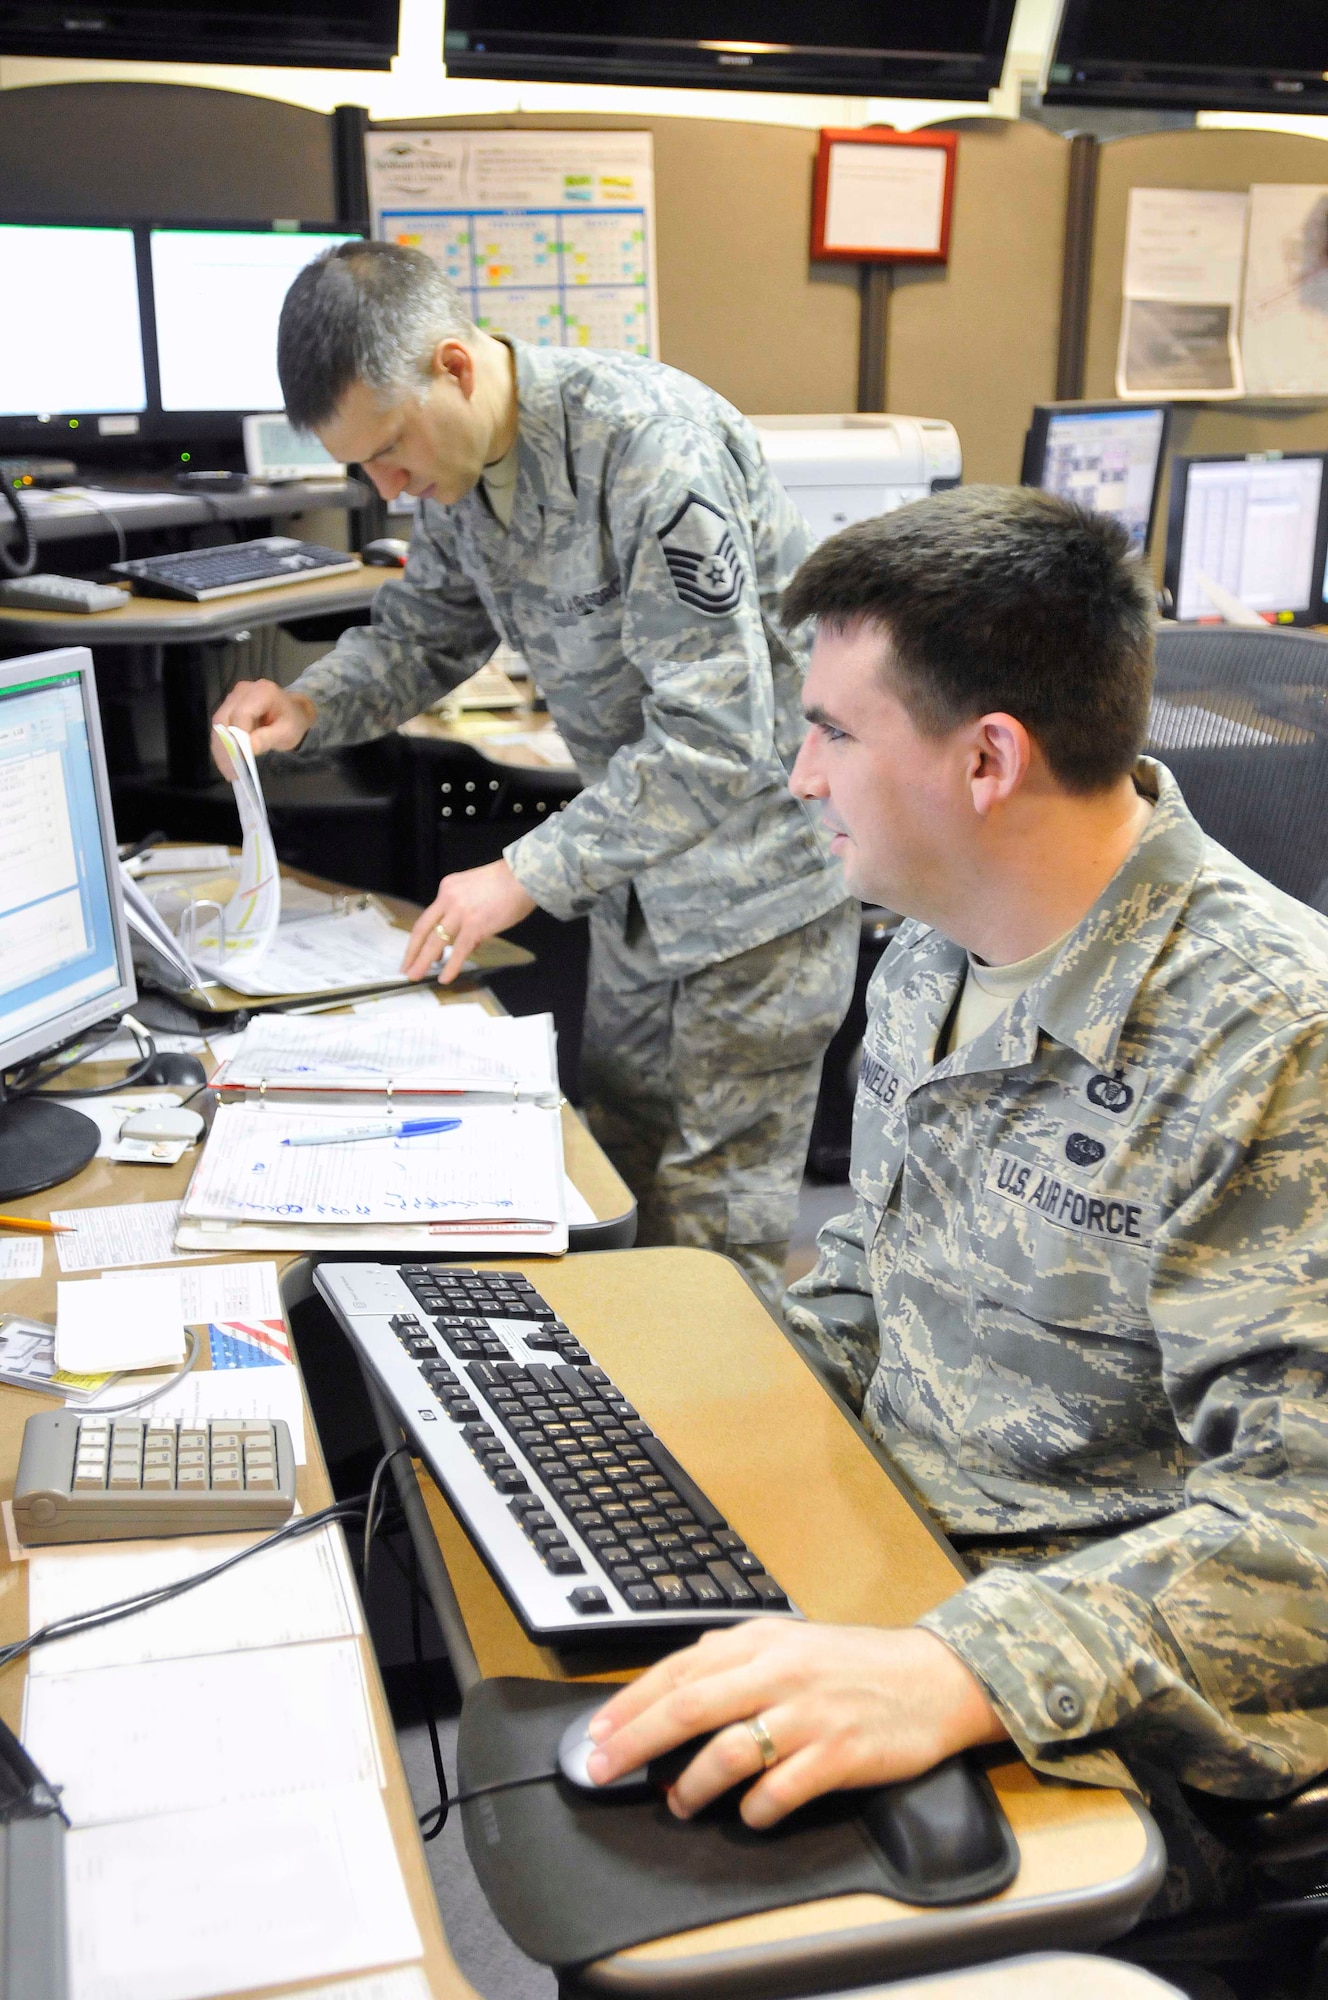 Master Sgt. William Mader and Tech. Sgt. Jon Daniels, 141st Air Refueling Wing Command Post controllers, verify checklist procedures during a training exercise at Fairchild Air Force Base, Wash., recently. (U.S. Air Force photo by Staff Sgt. Johanna Brooks/Released)